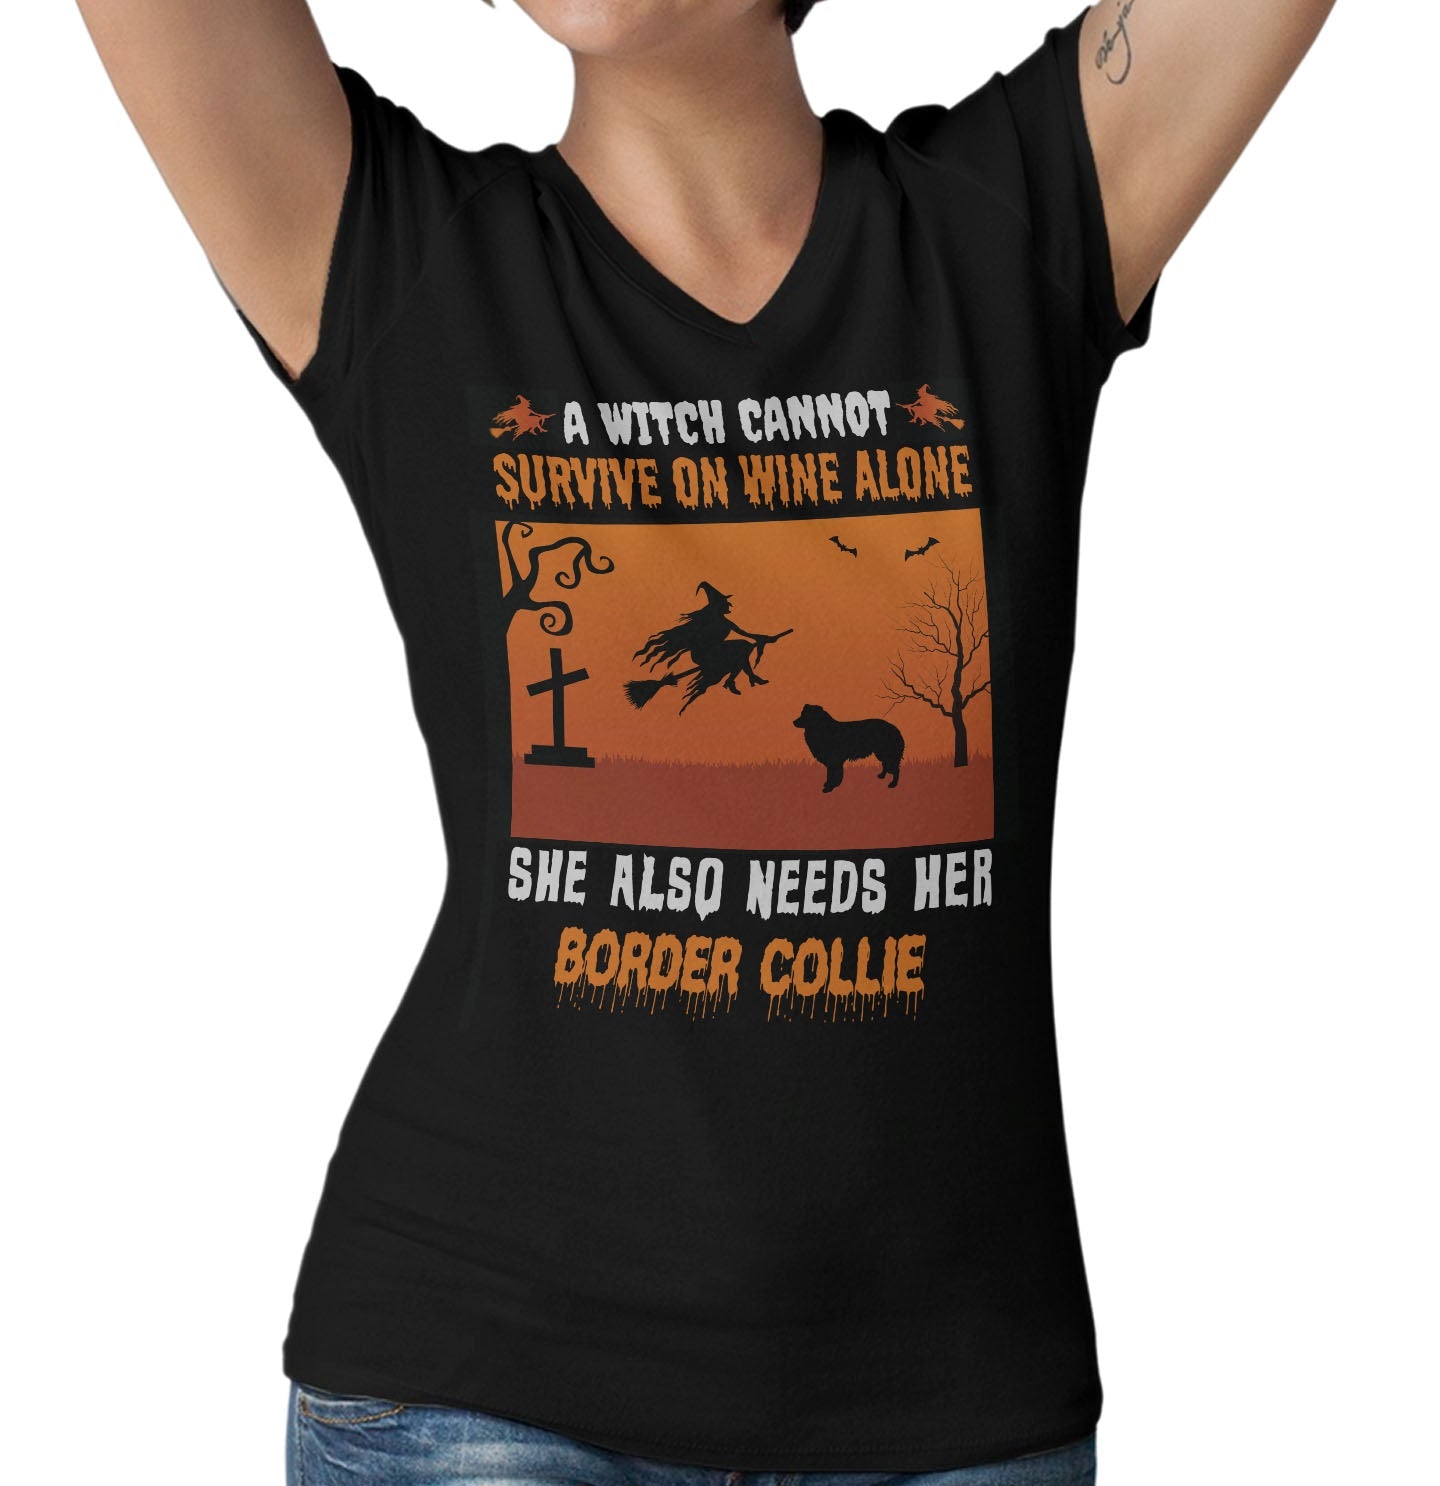 A Witch Needs Her Border Collie - Women's V-Neck T-Shirt